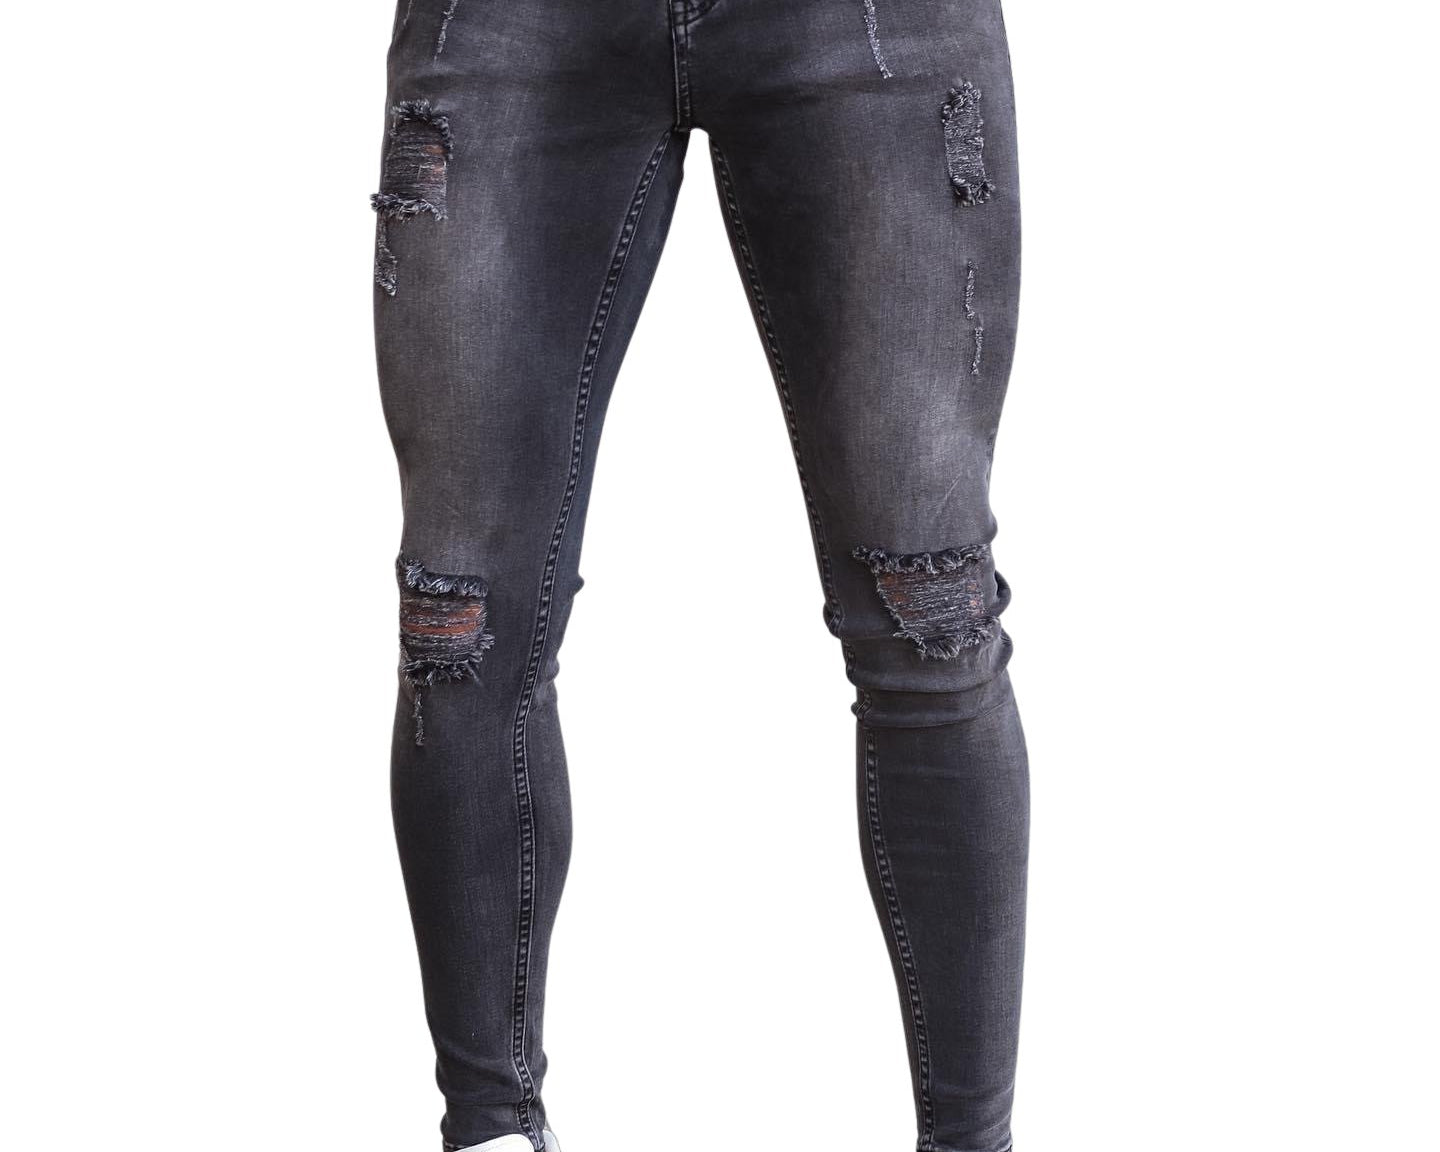 Spotless Mind - Grey Skinny Jeans for Men - Sarman Fashion - Wholesale Clothing Fashion Brand for Men from Canada